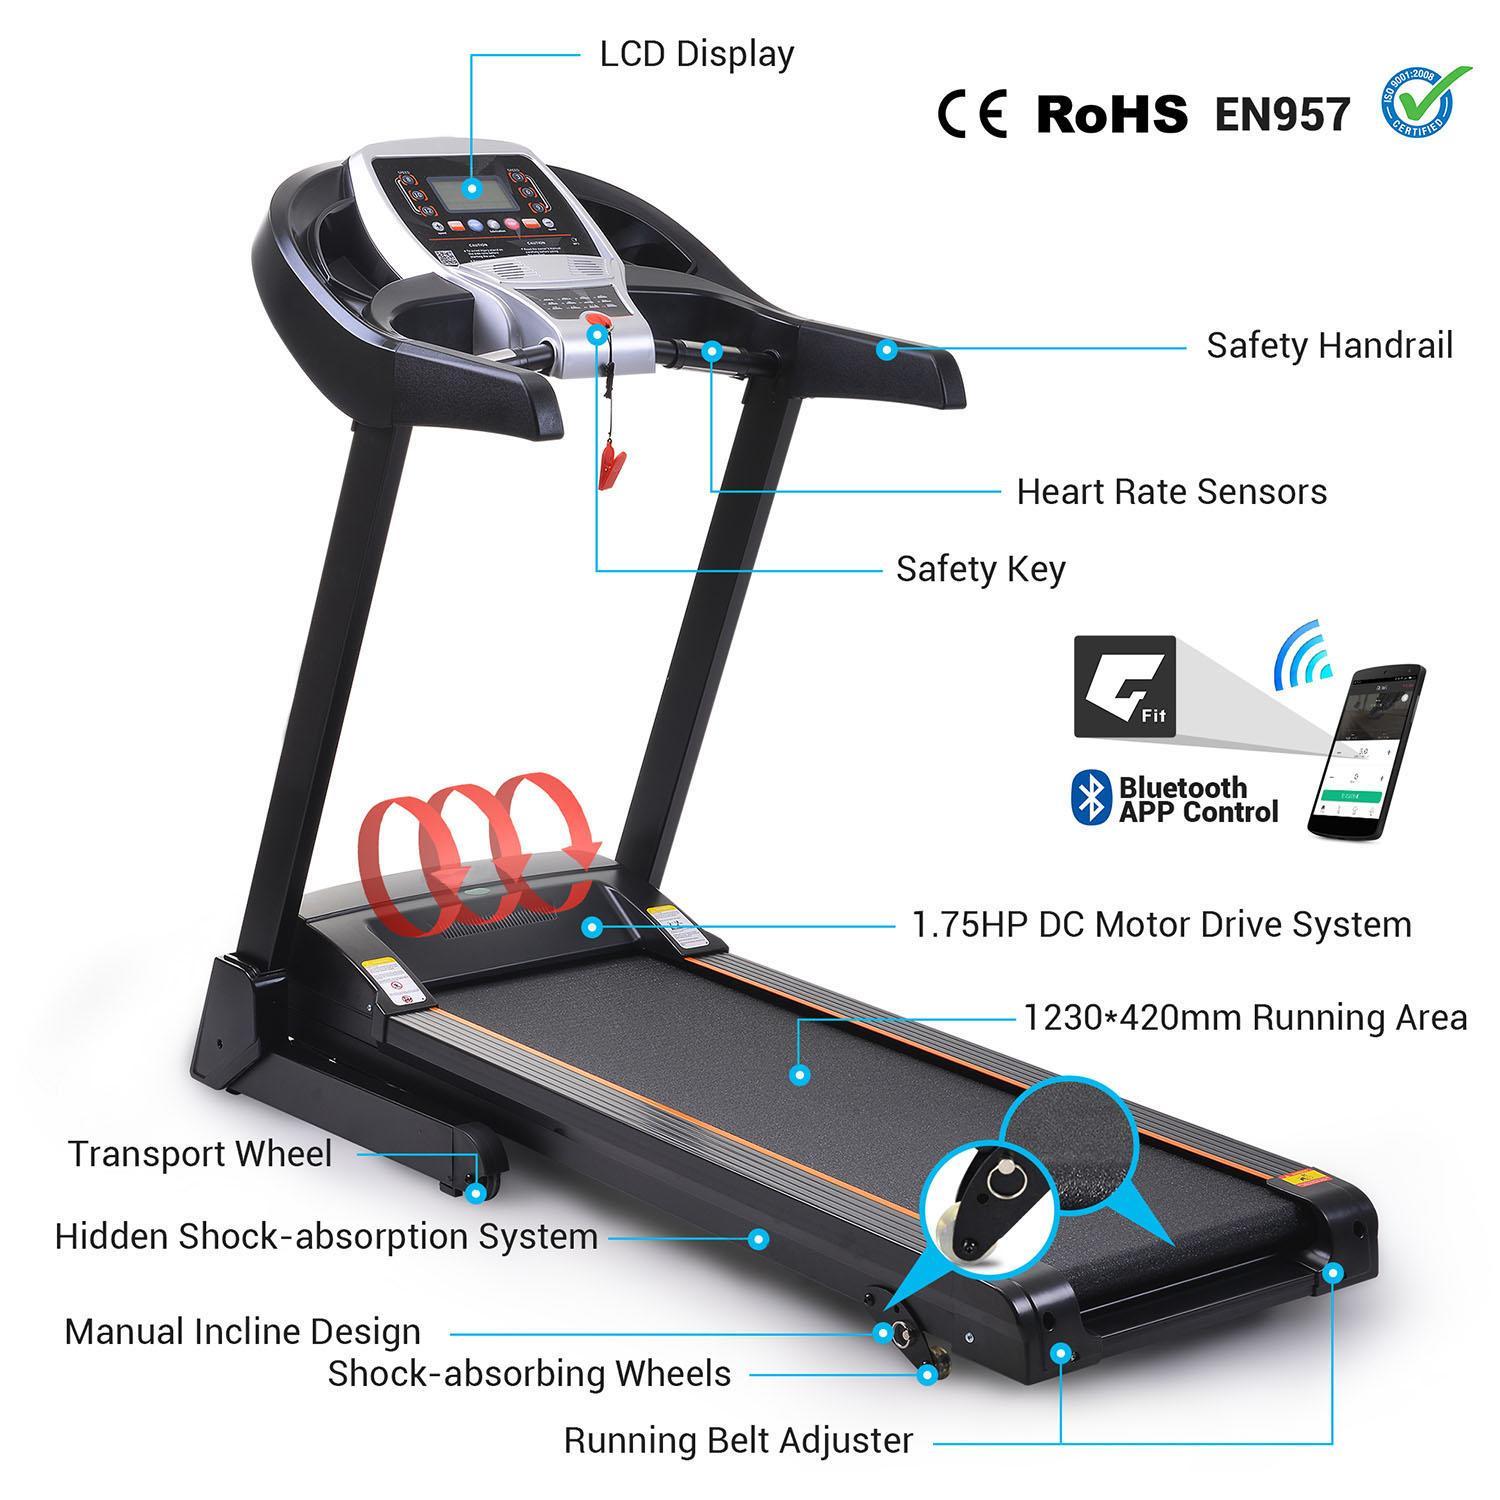 Ancheer 2.25HP Low Noise Bluetooth +12 Running Programs 230LB Electric Folding Treadmill With Incline 3%/5% App Control,Shock Reduction System - image 2 of 10